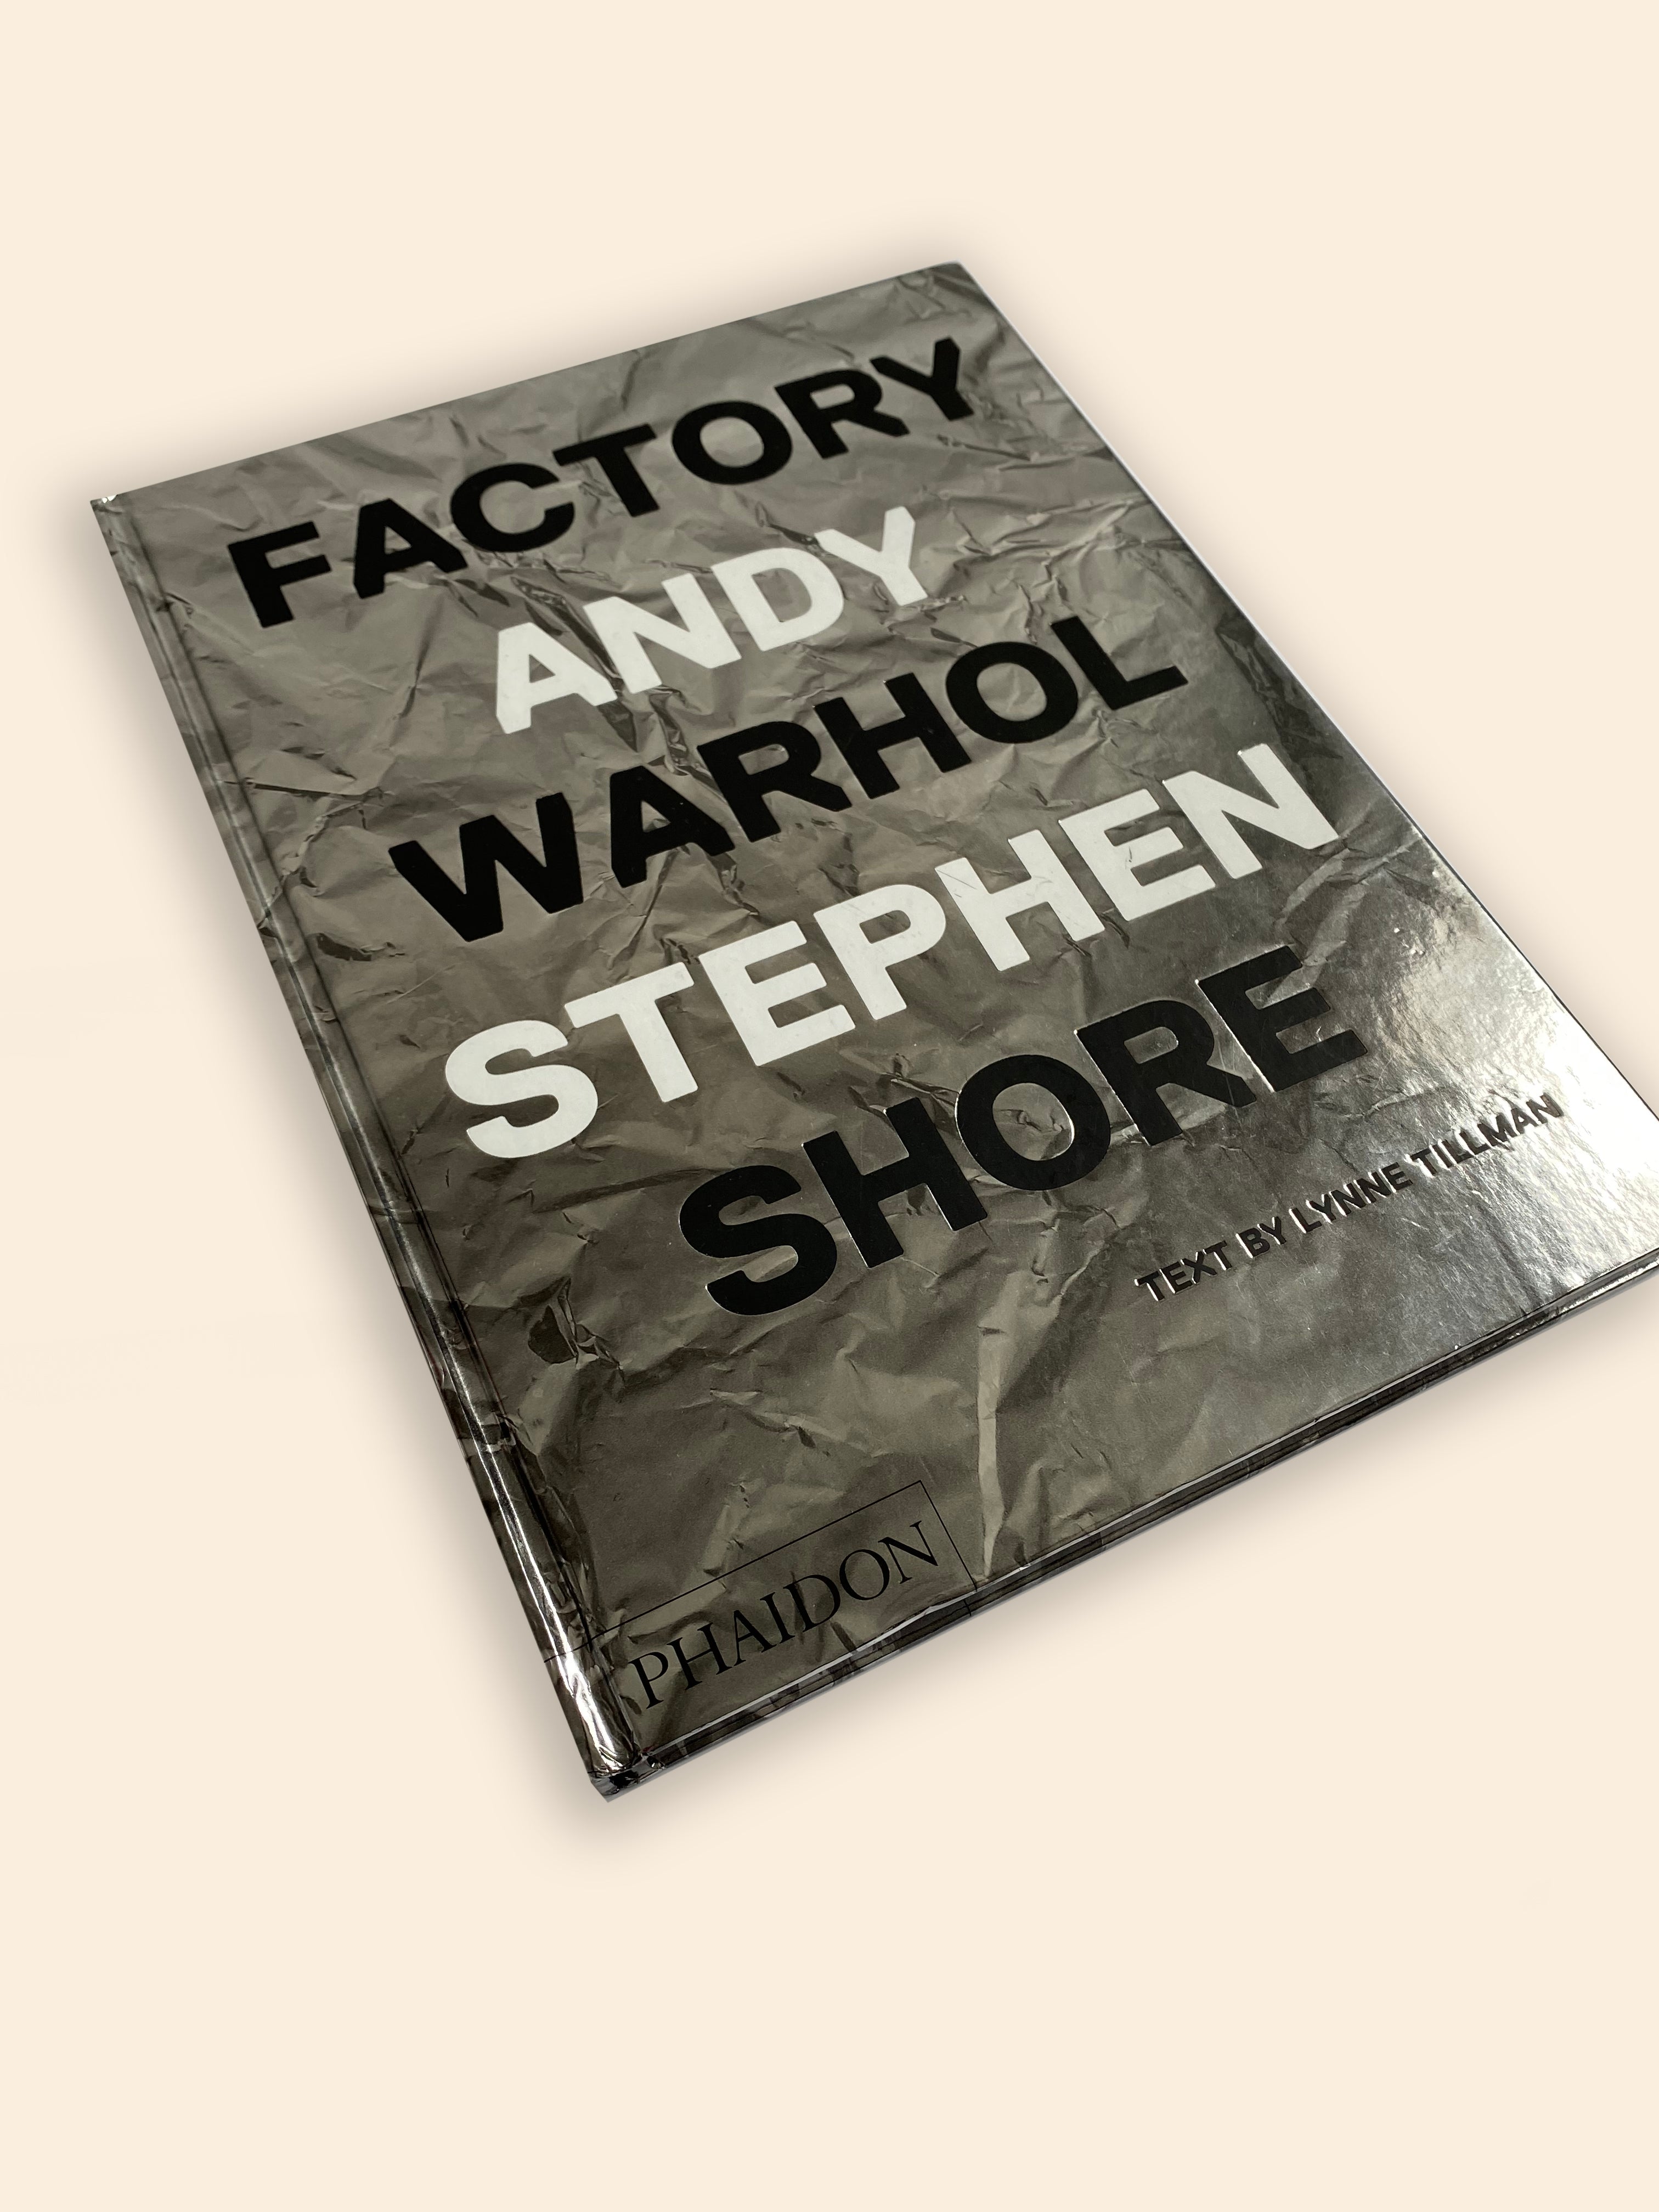 Factory: Andy Warhol by Stephen Shore